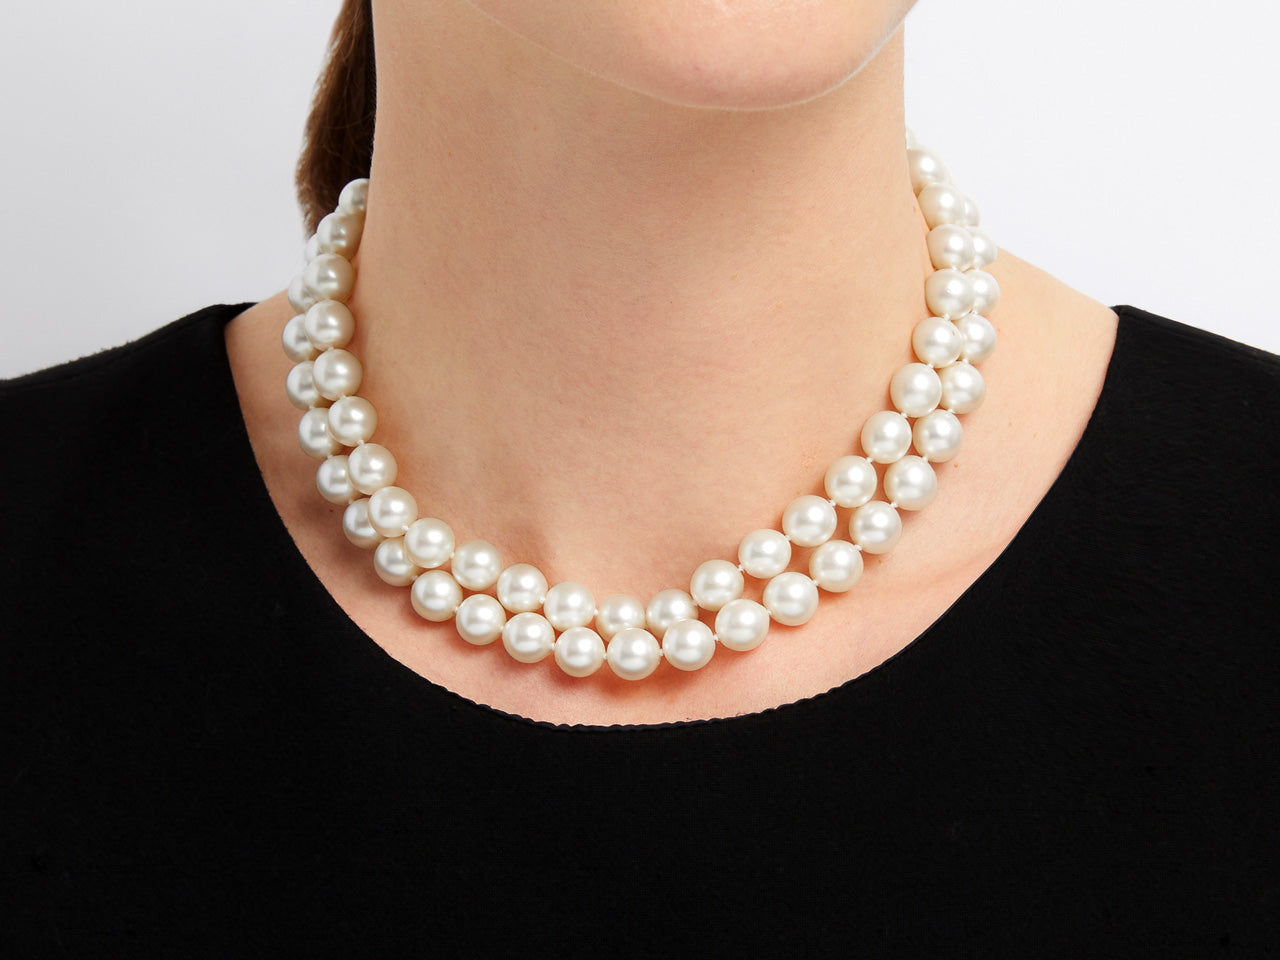 Pair of Akoya Pearl Necklaces in 14K Gold